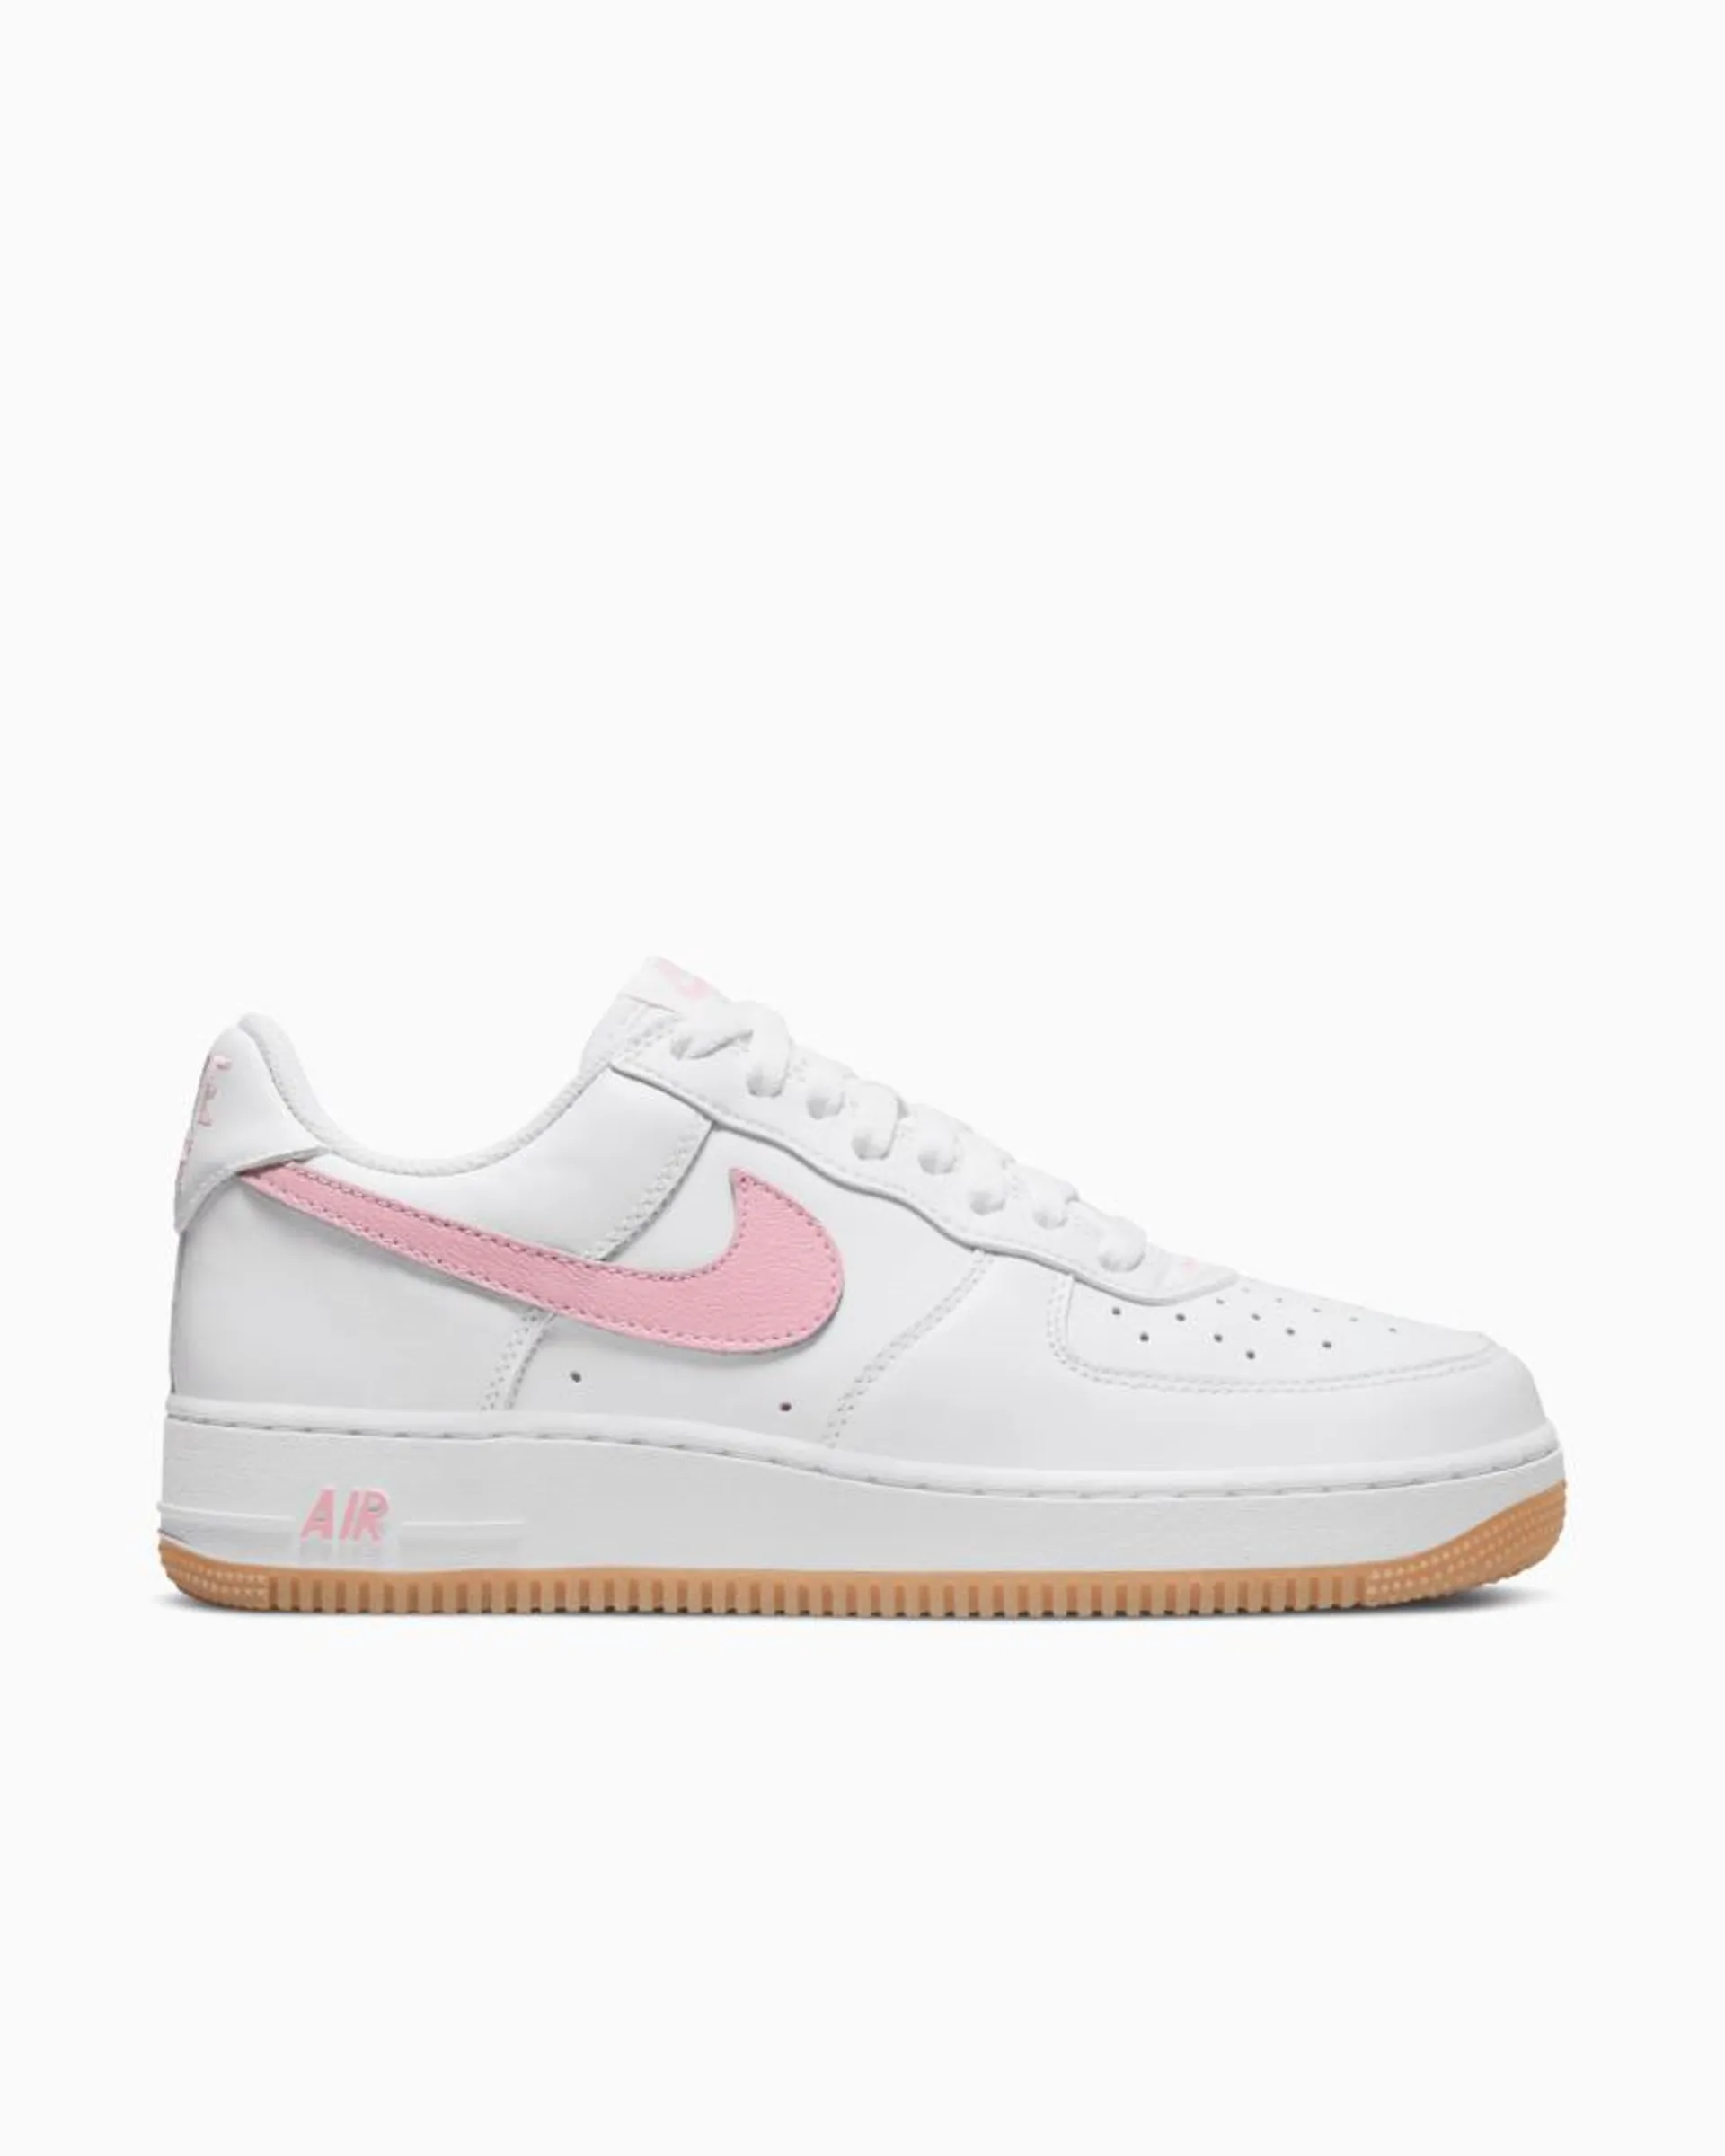 Nike Air Force 1 Low Retro "Anniversary Edition"